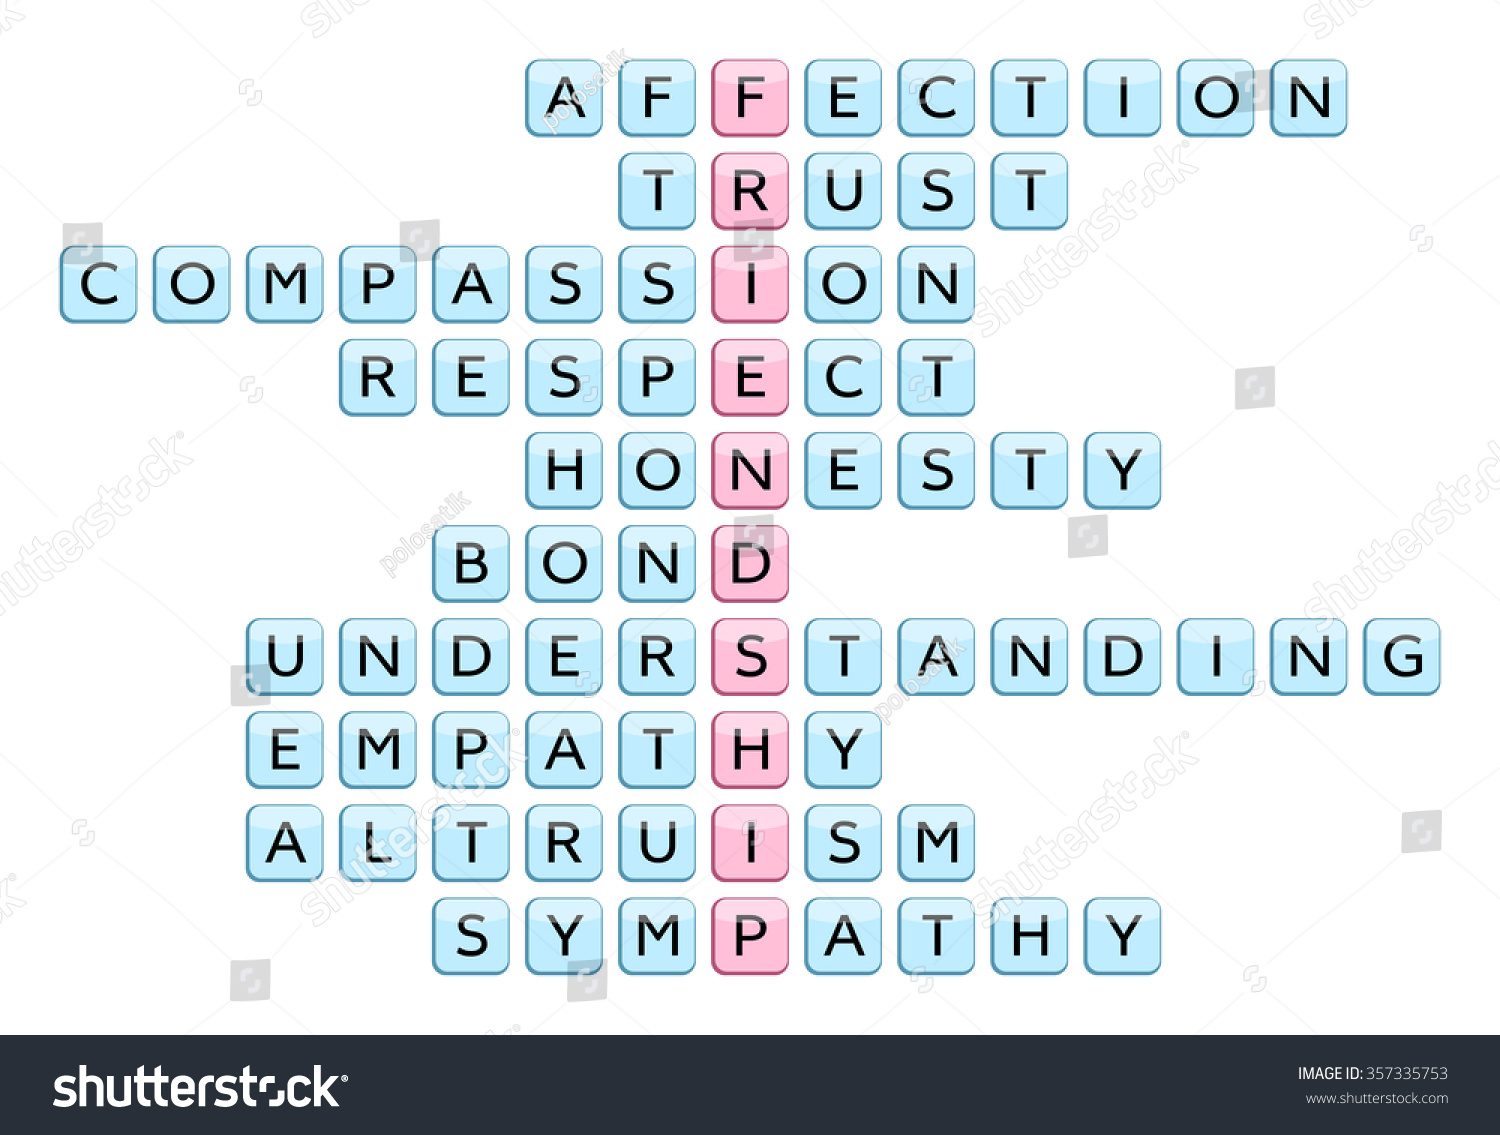 Crossword for the word Friendship and words associated with Friendship (Affection, Trust, Compassion, Honesty, Respect, Bond, Understanding, Empathy, Altruism, Sympathy), vector illustration #357335753